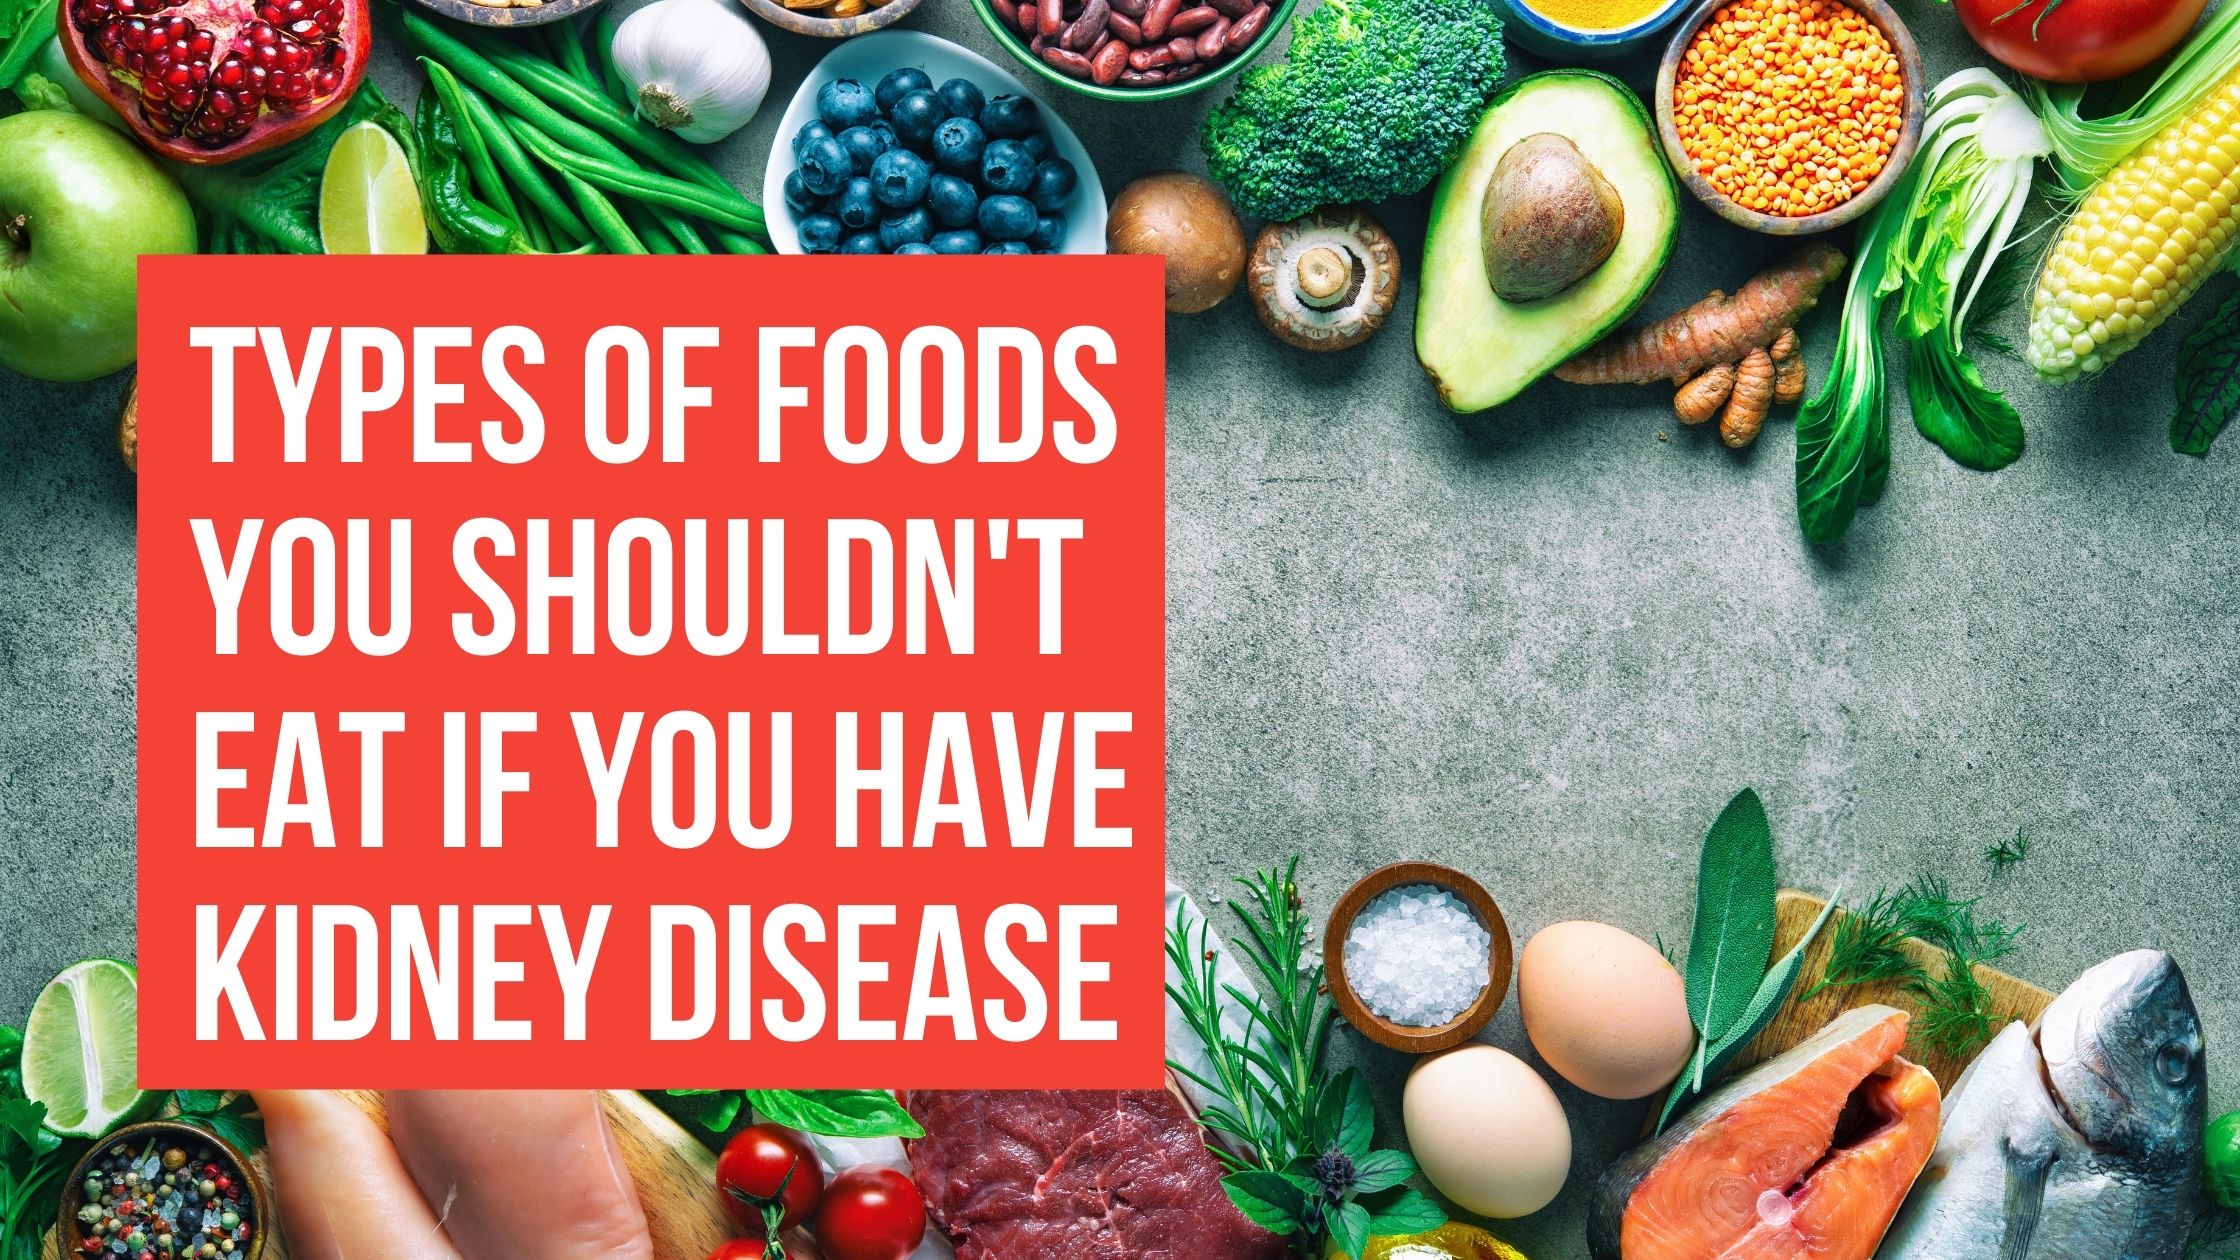 Types of Foods Your Shouldn't Eat If You Have Kidney Disease